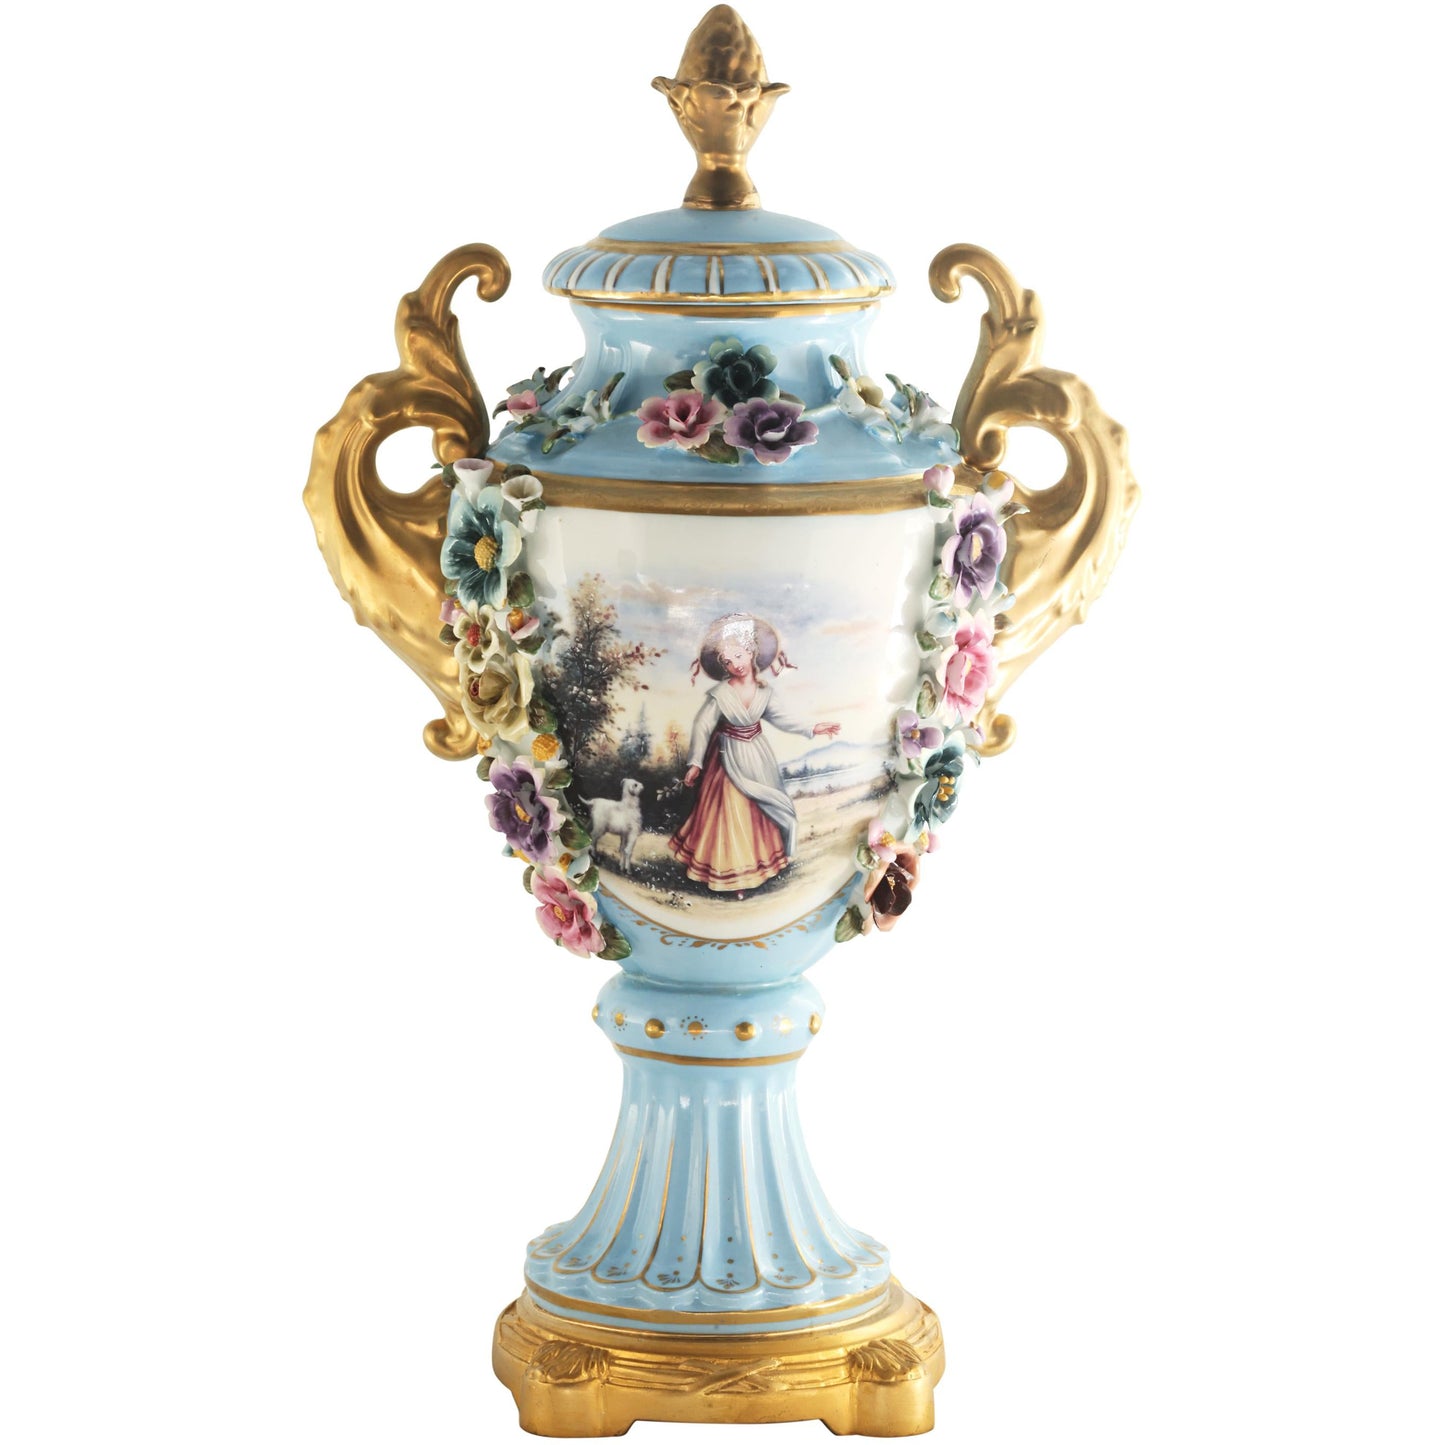 Light Blue Hand-painted Rococo Vase with Porcelain Flowers